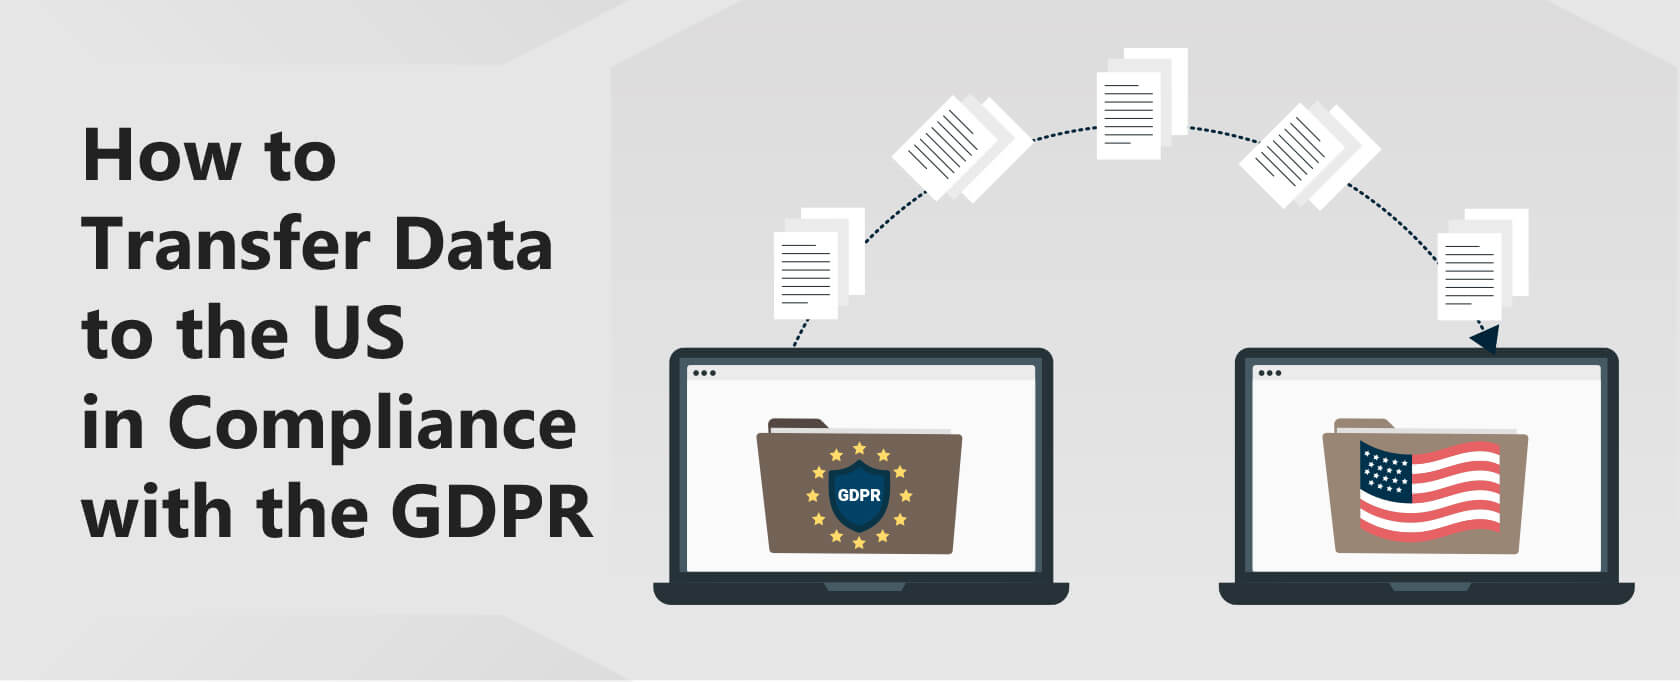 How to Transfer Data to the US in Compliance with the GDPR